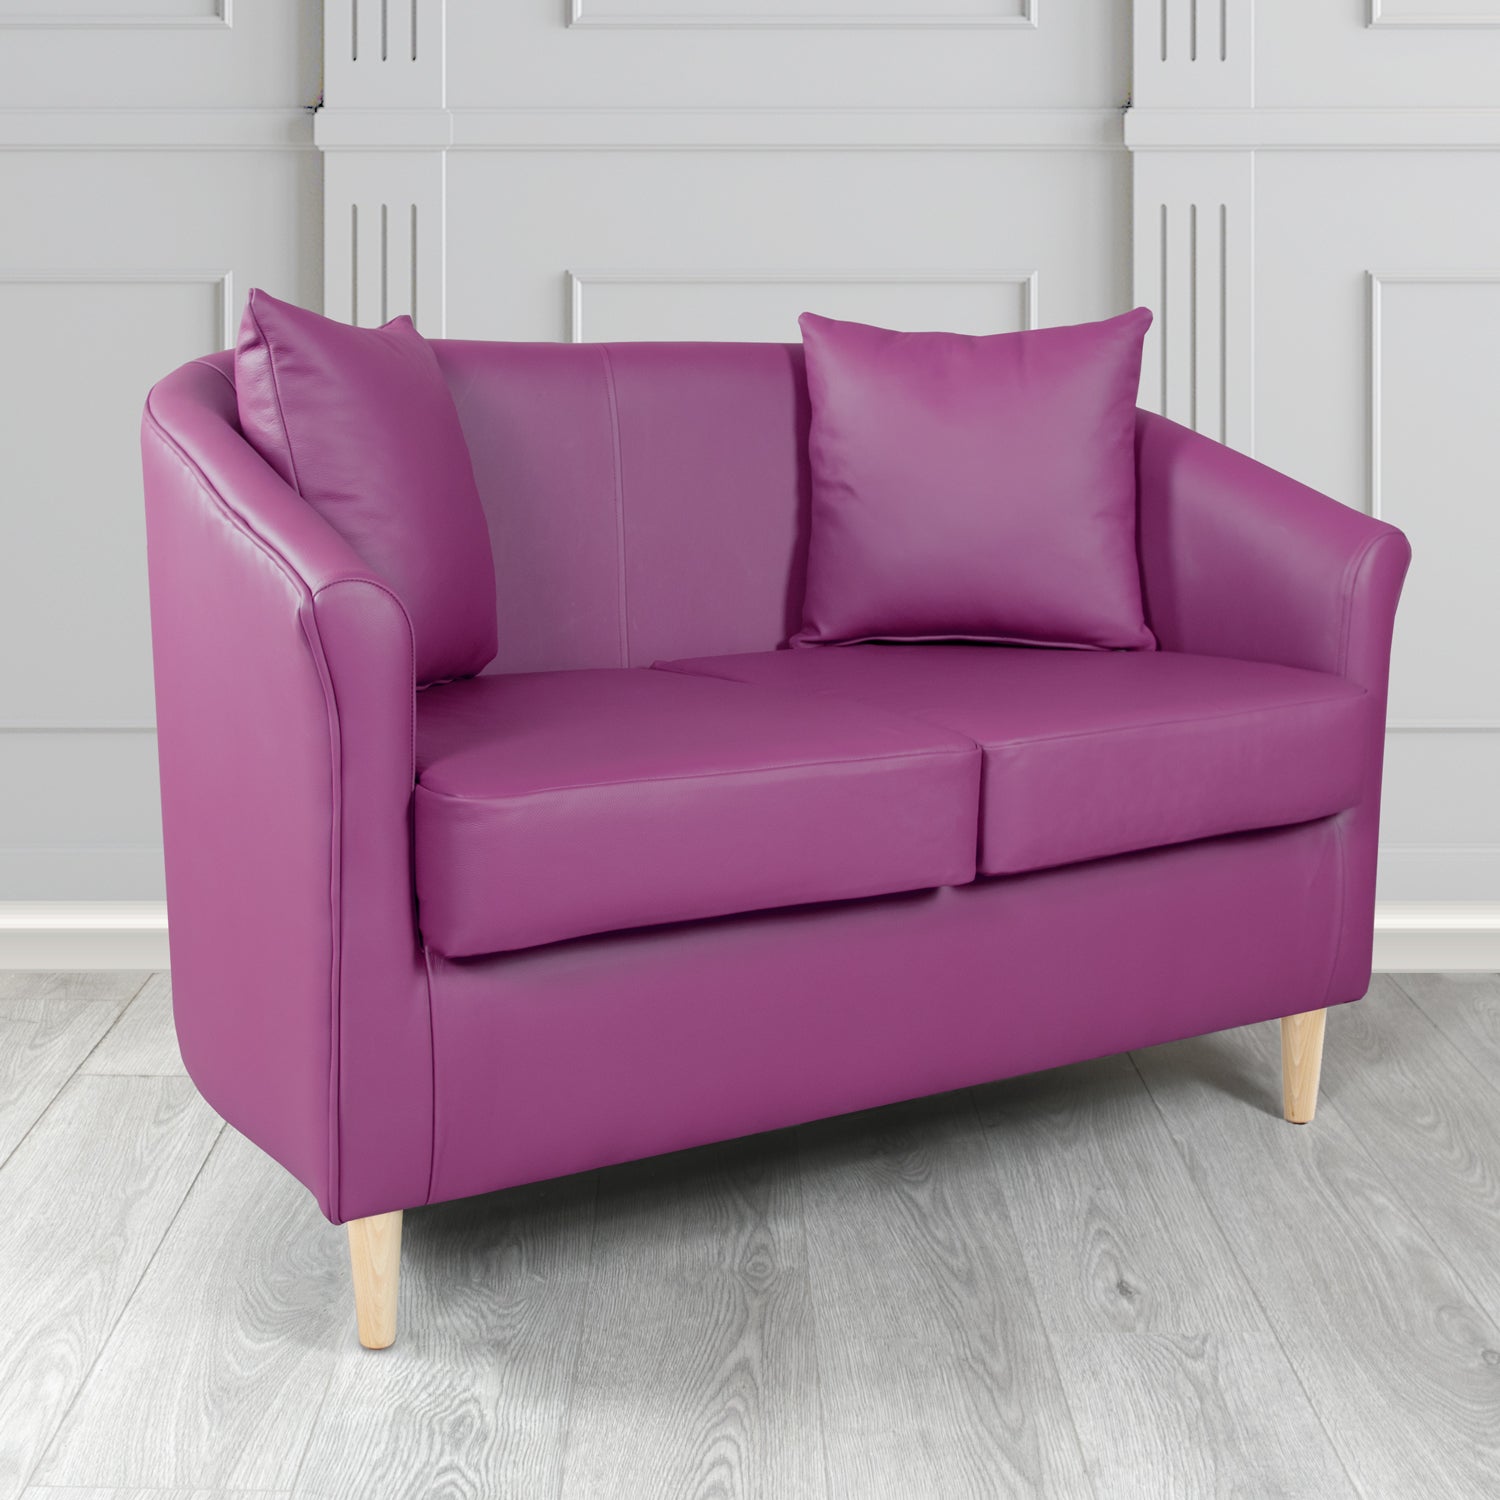 St Tropez Shelly Wineberry Crib 5 Genuine Leather 2 Seater Tub Sofa with Scatter Cushions - The Tub Chair Shop